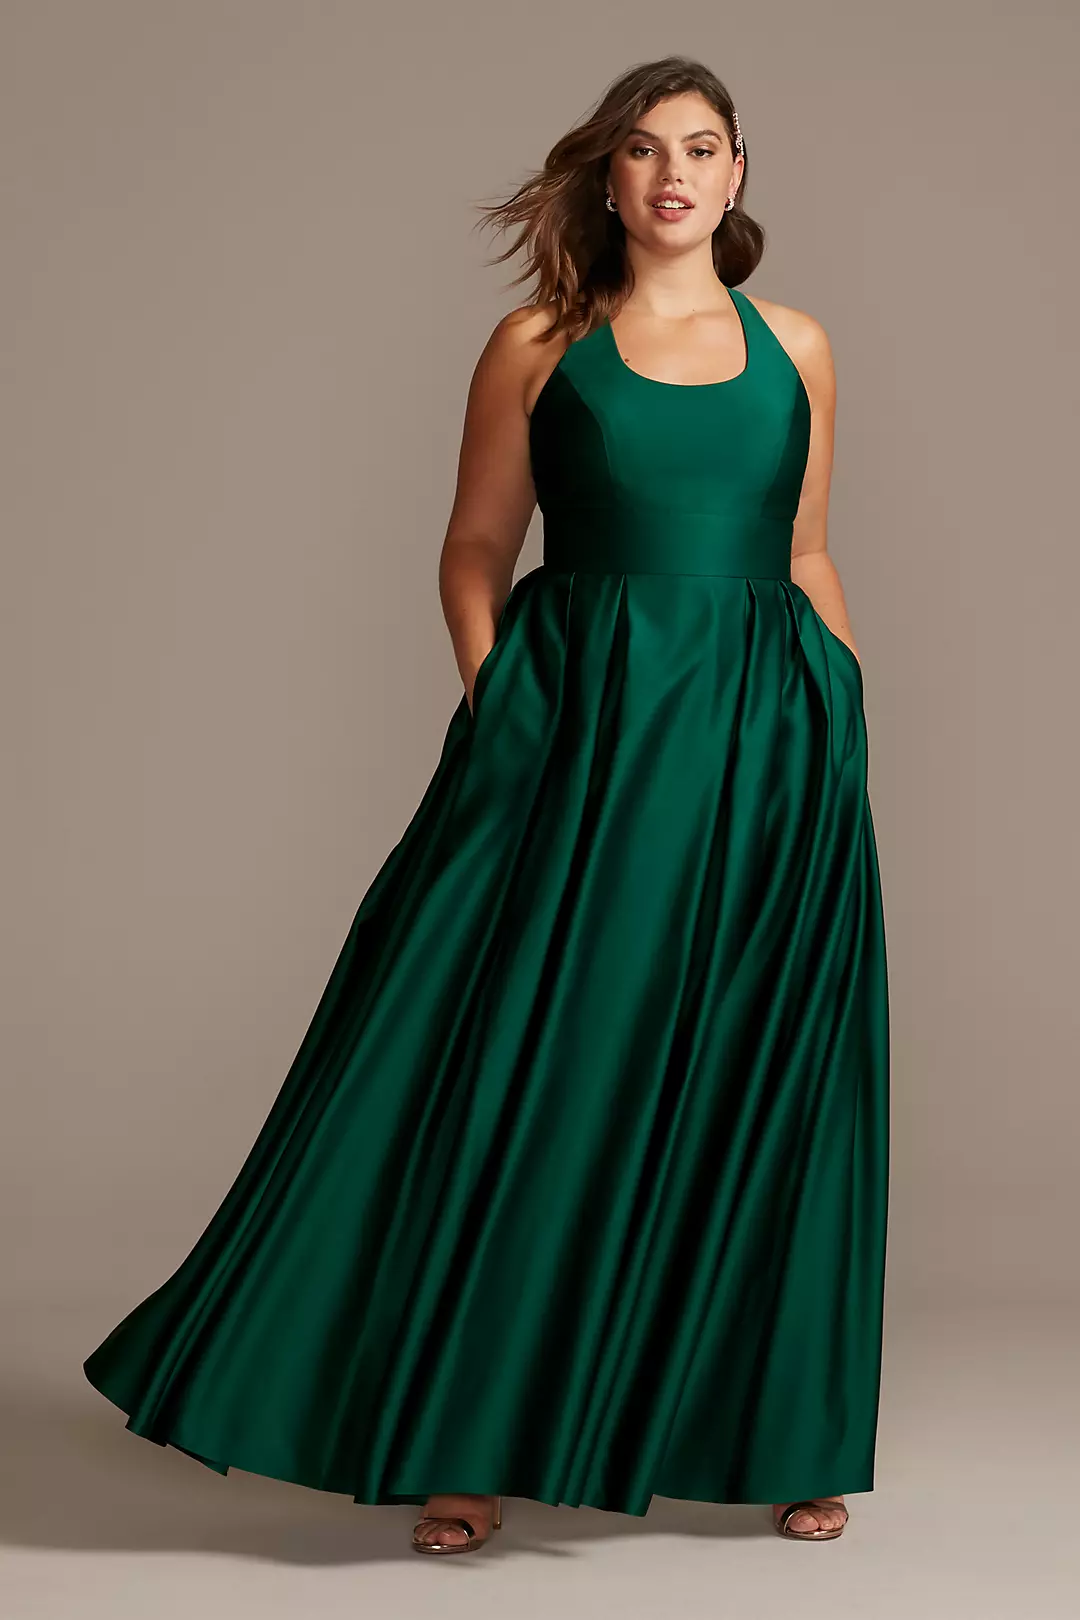 Satin Racerback Ball Gown with Cutout Image